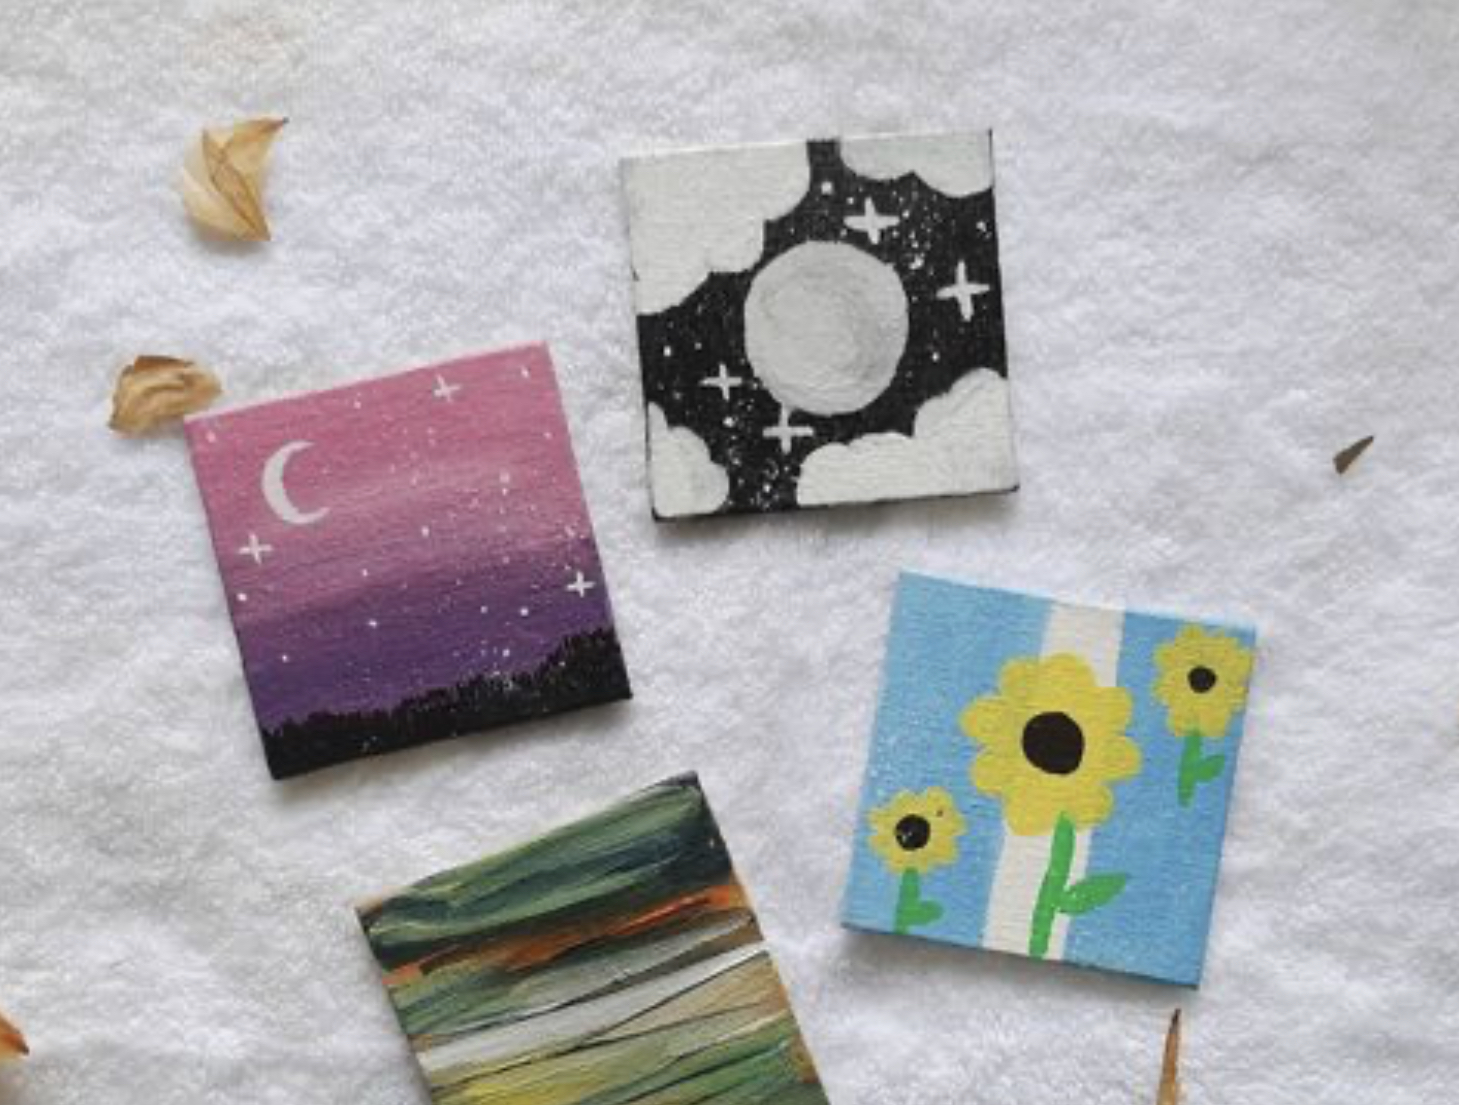 12 Cute Mini Canvas Painting Ideas For Total Beginners - Indie12